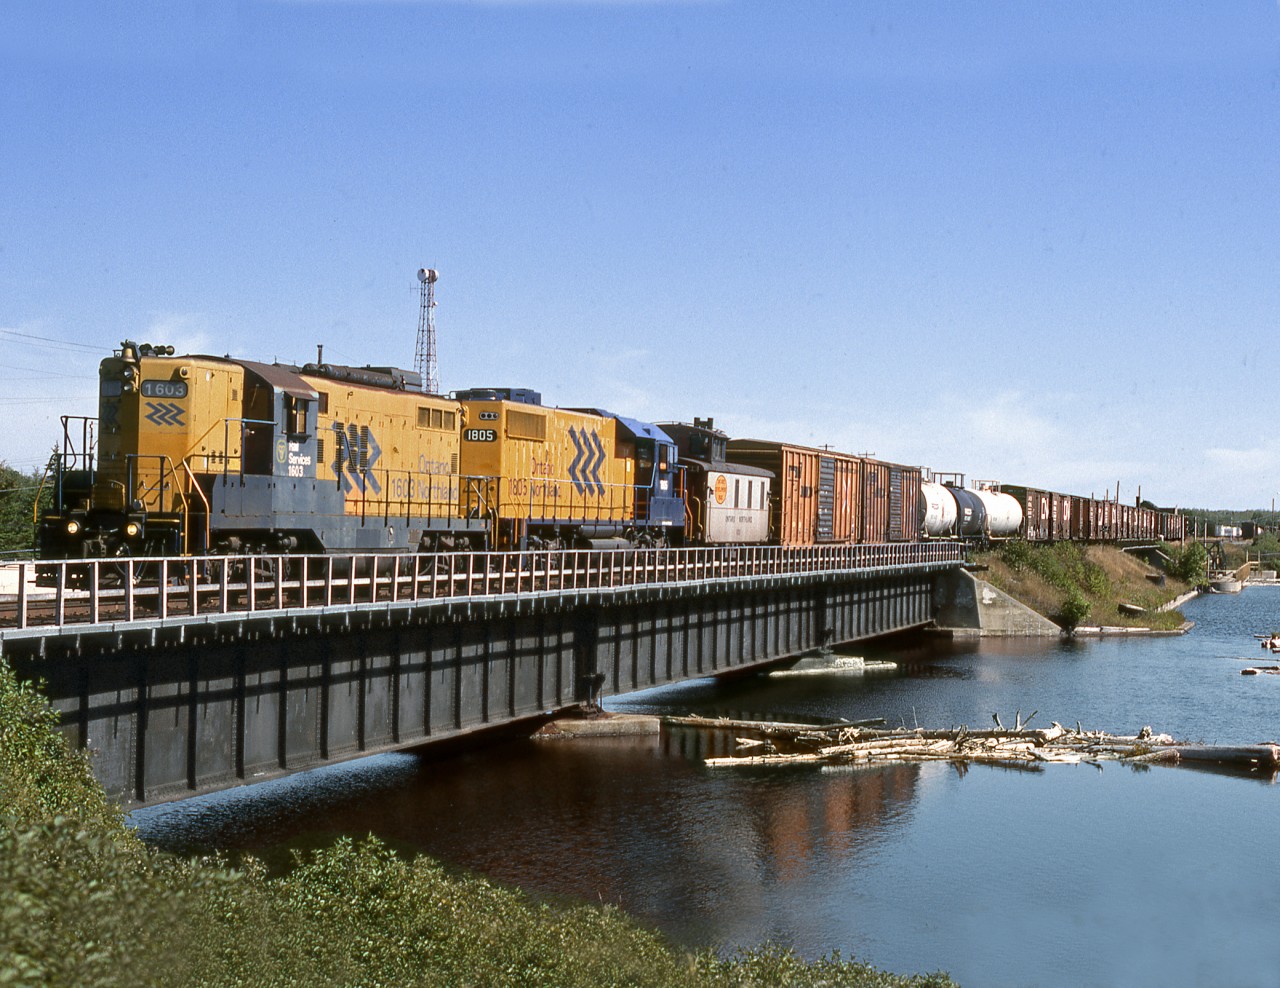 The turn from Cochrane switches west of the station over The dam on the Kapuskasing River which serves the Spruce Falls paper mill, Kapuskasing's reason d'etre